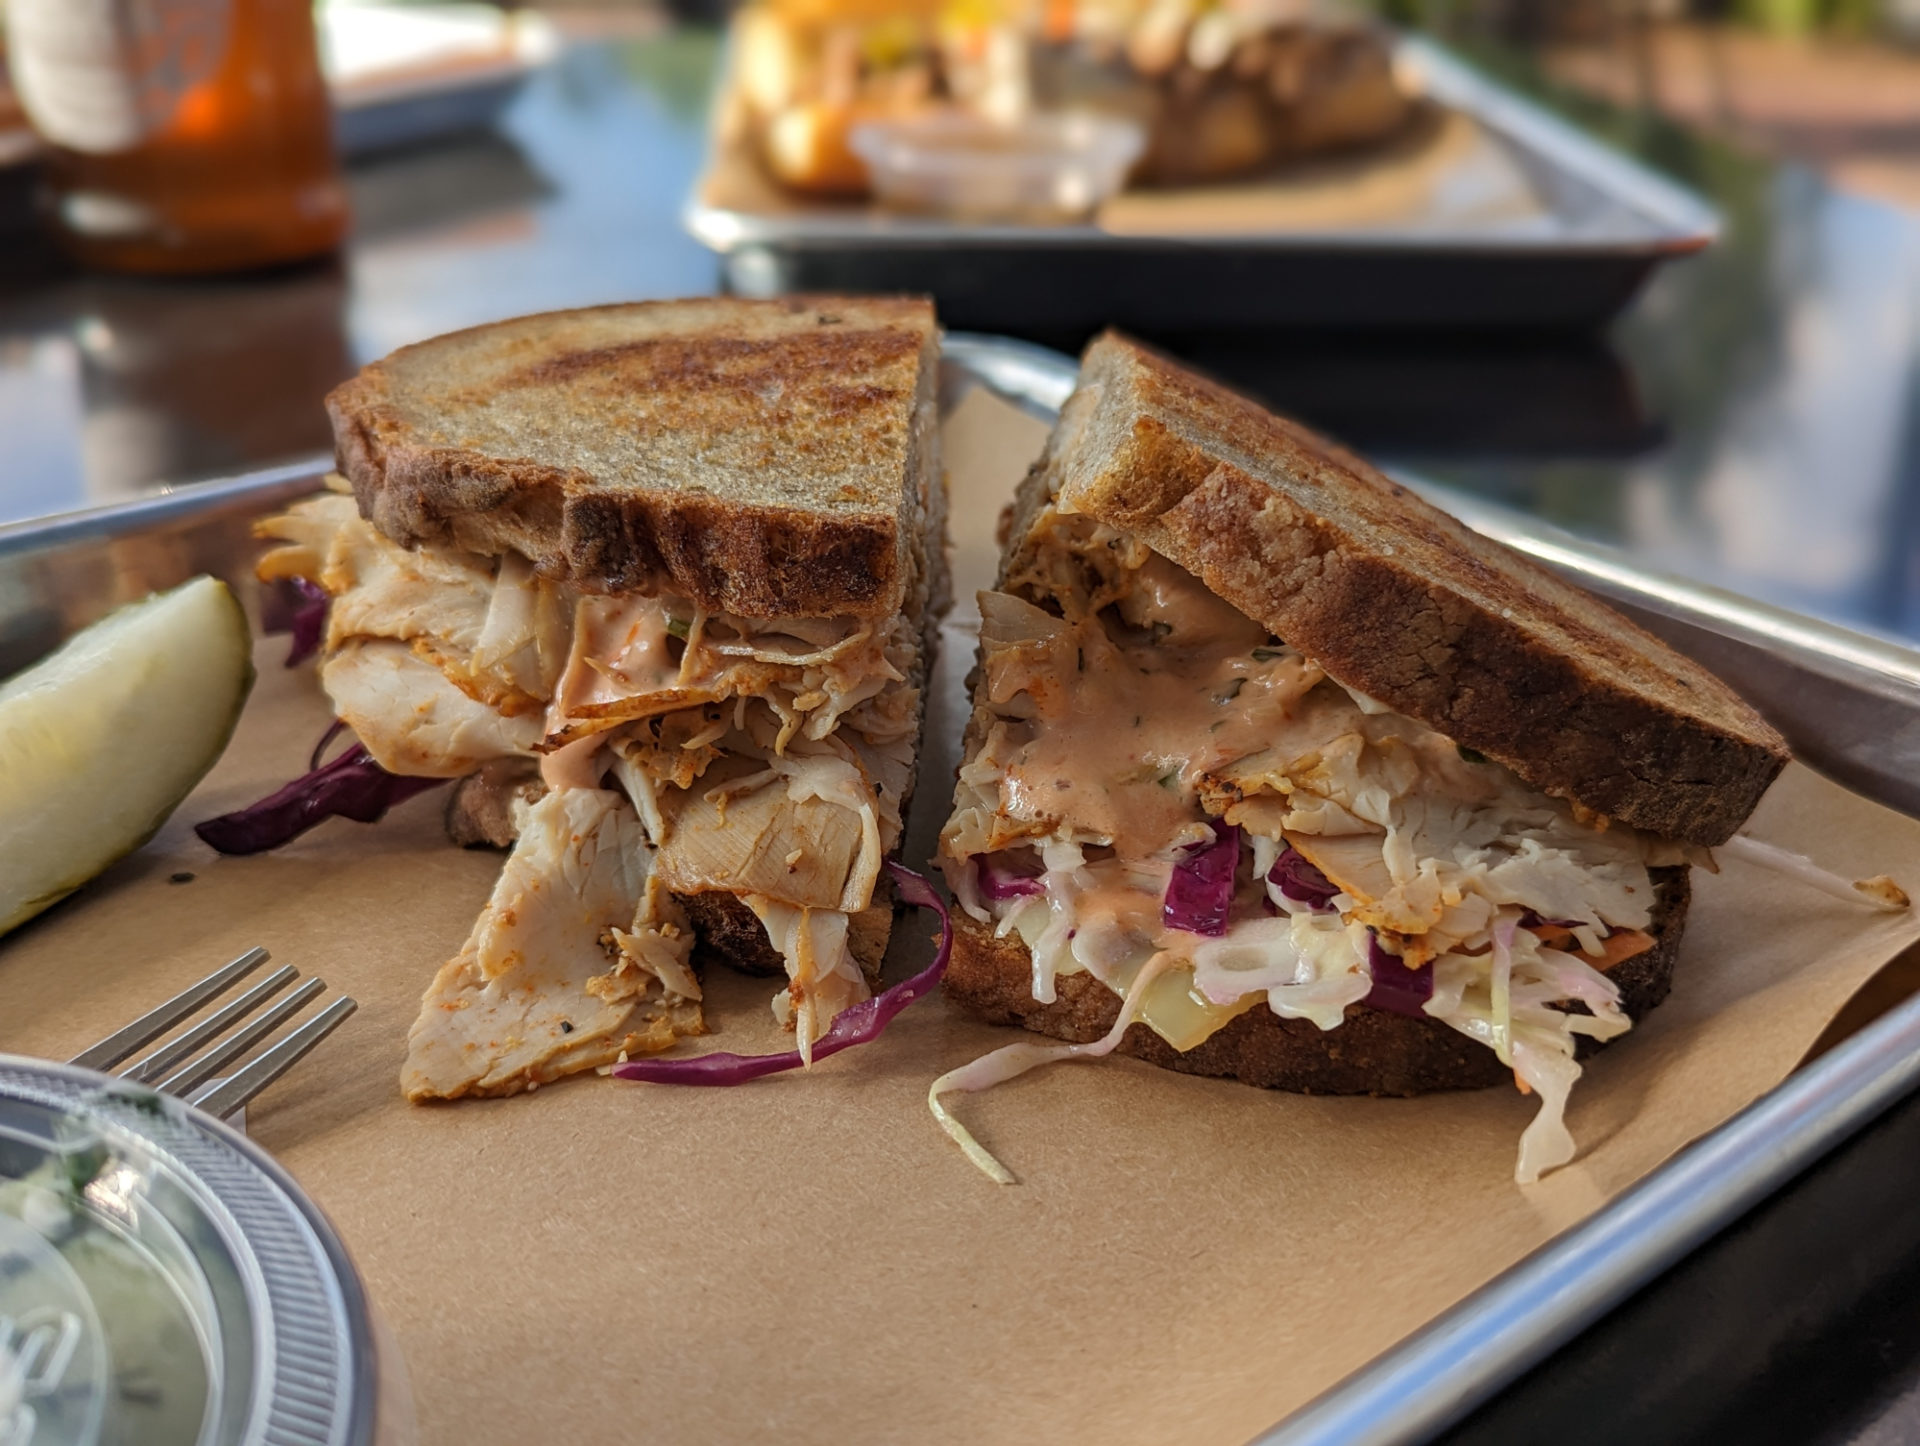 A side view of a sandwich on a tray. Toasted bread with turkey, sauce, and coleslaw spilling out. The tray also has a fork, a deli container, and a pickle. In the background, out of focus, there are other trays of food at Martinelli's Market. Photo by Tayler Neumann.